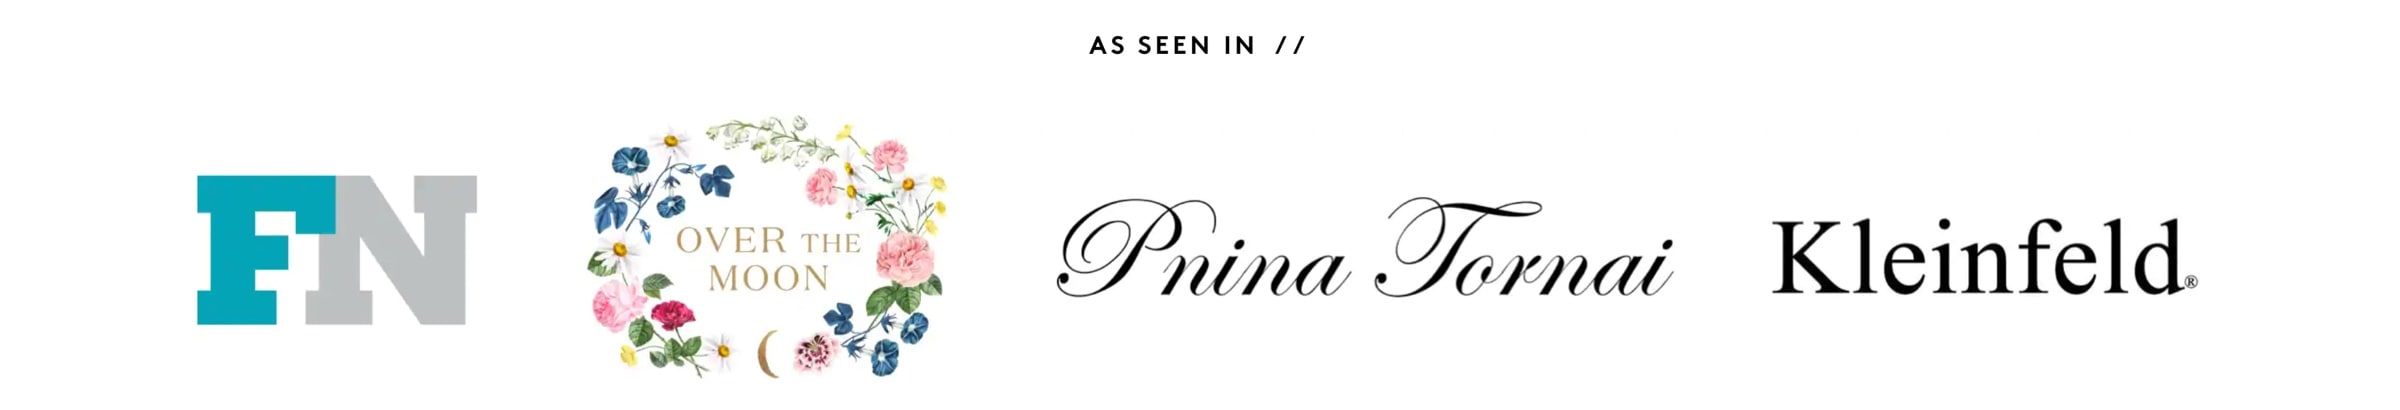 as seen in footwear news, over the moon, pnina tornai and kleinfeld